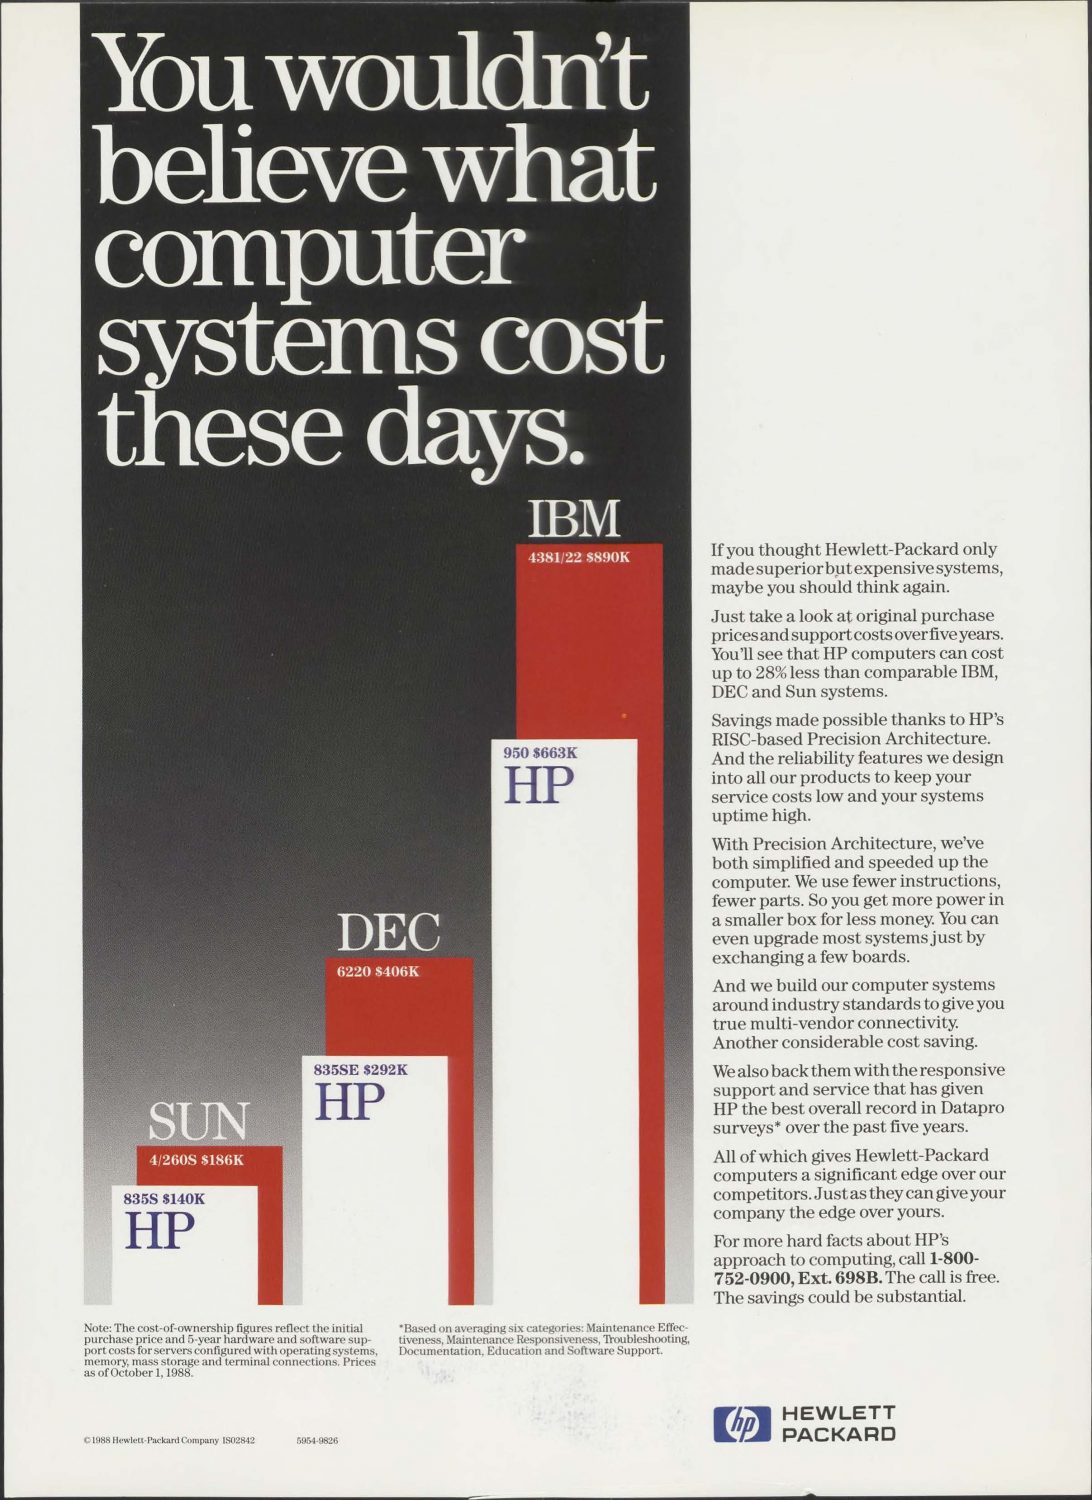 A print ad showing a graph that illustrates how HP RISC technology enables their products to cost less than competitors.